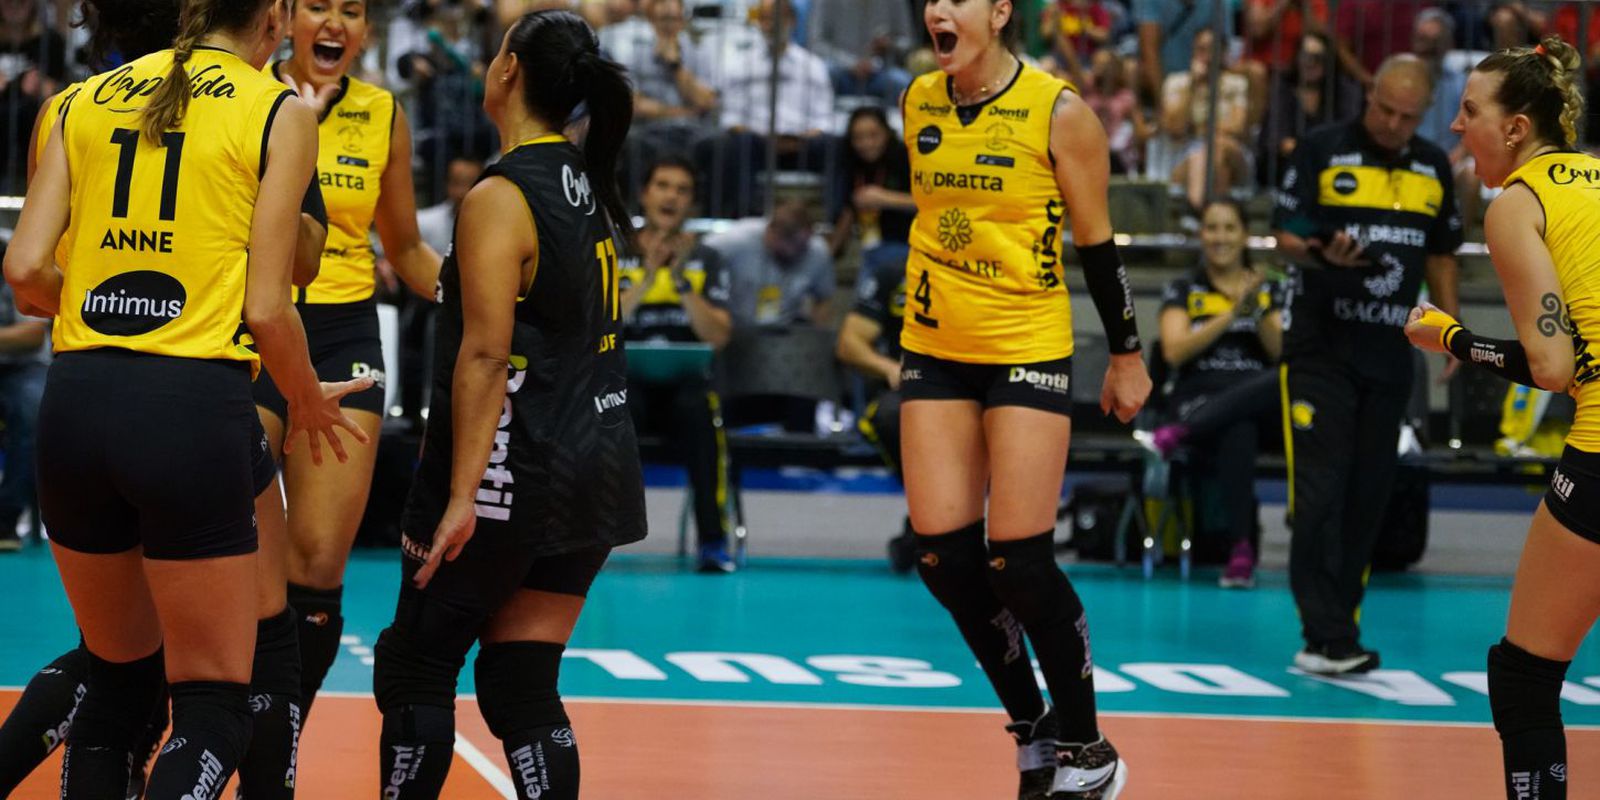 Praia Clube and Minas compete in the final of the Brazil Women's Volleyball Cup